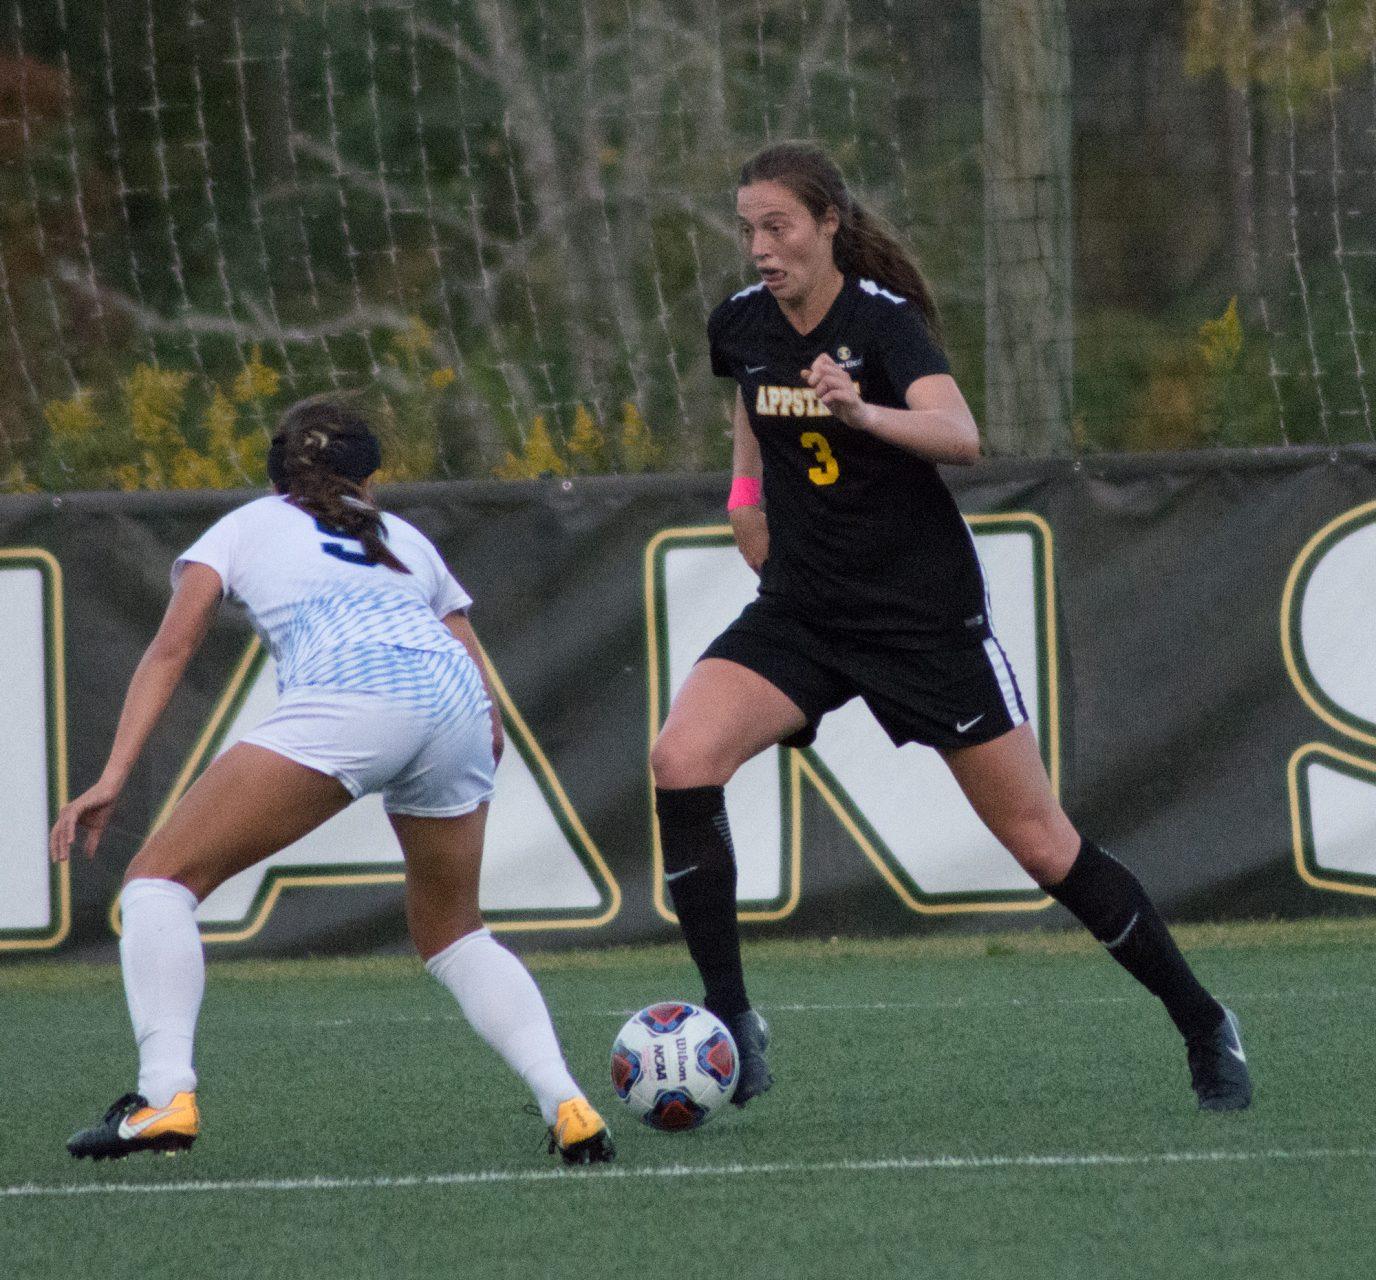 Forward Sharon Osterbind  looking to move the ball up the pitch. The Mountaineers lost to Georgia Southern 2-1 on October 6, 2017 at Ted Mackorell Soccer Complex.